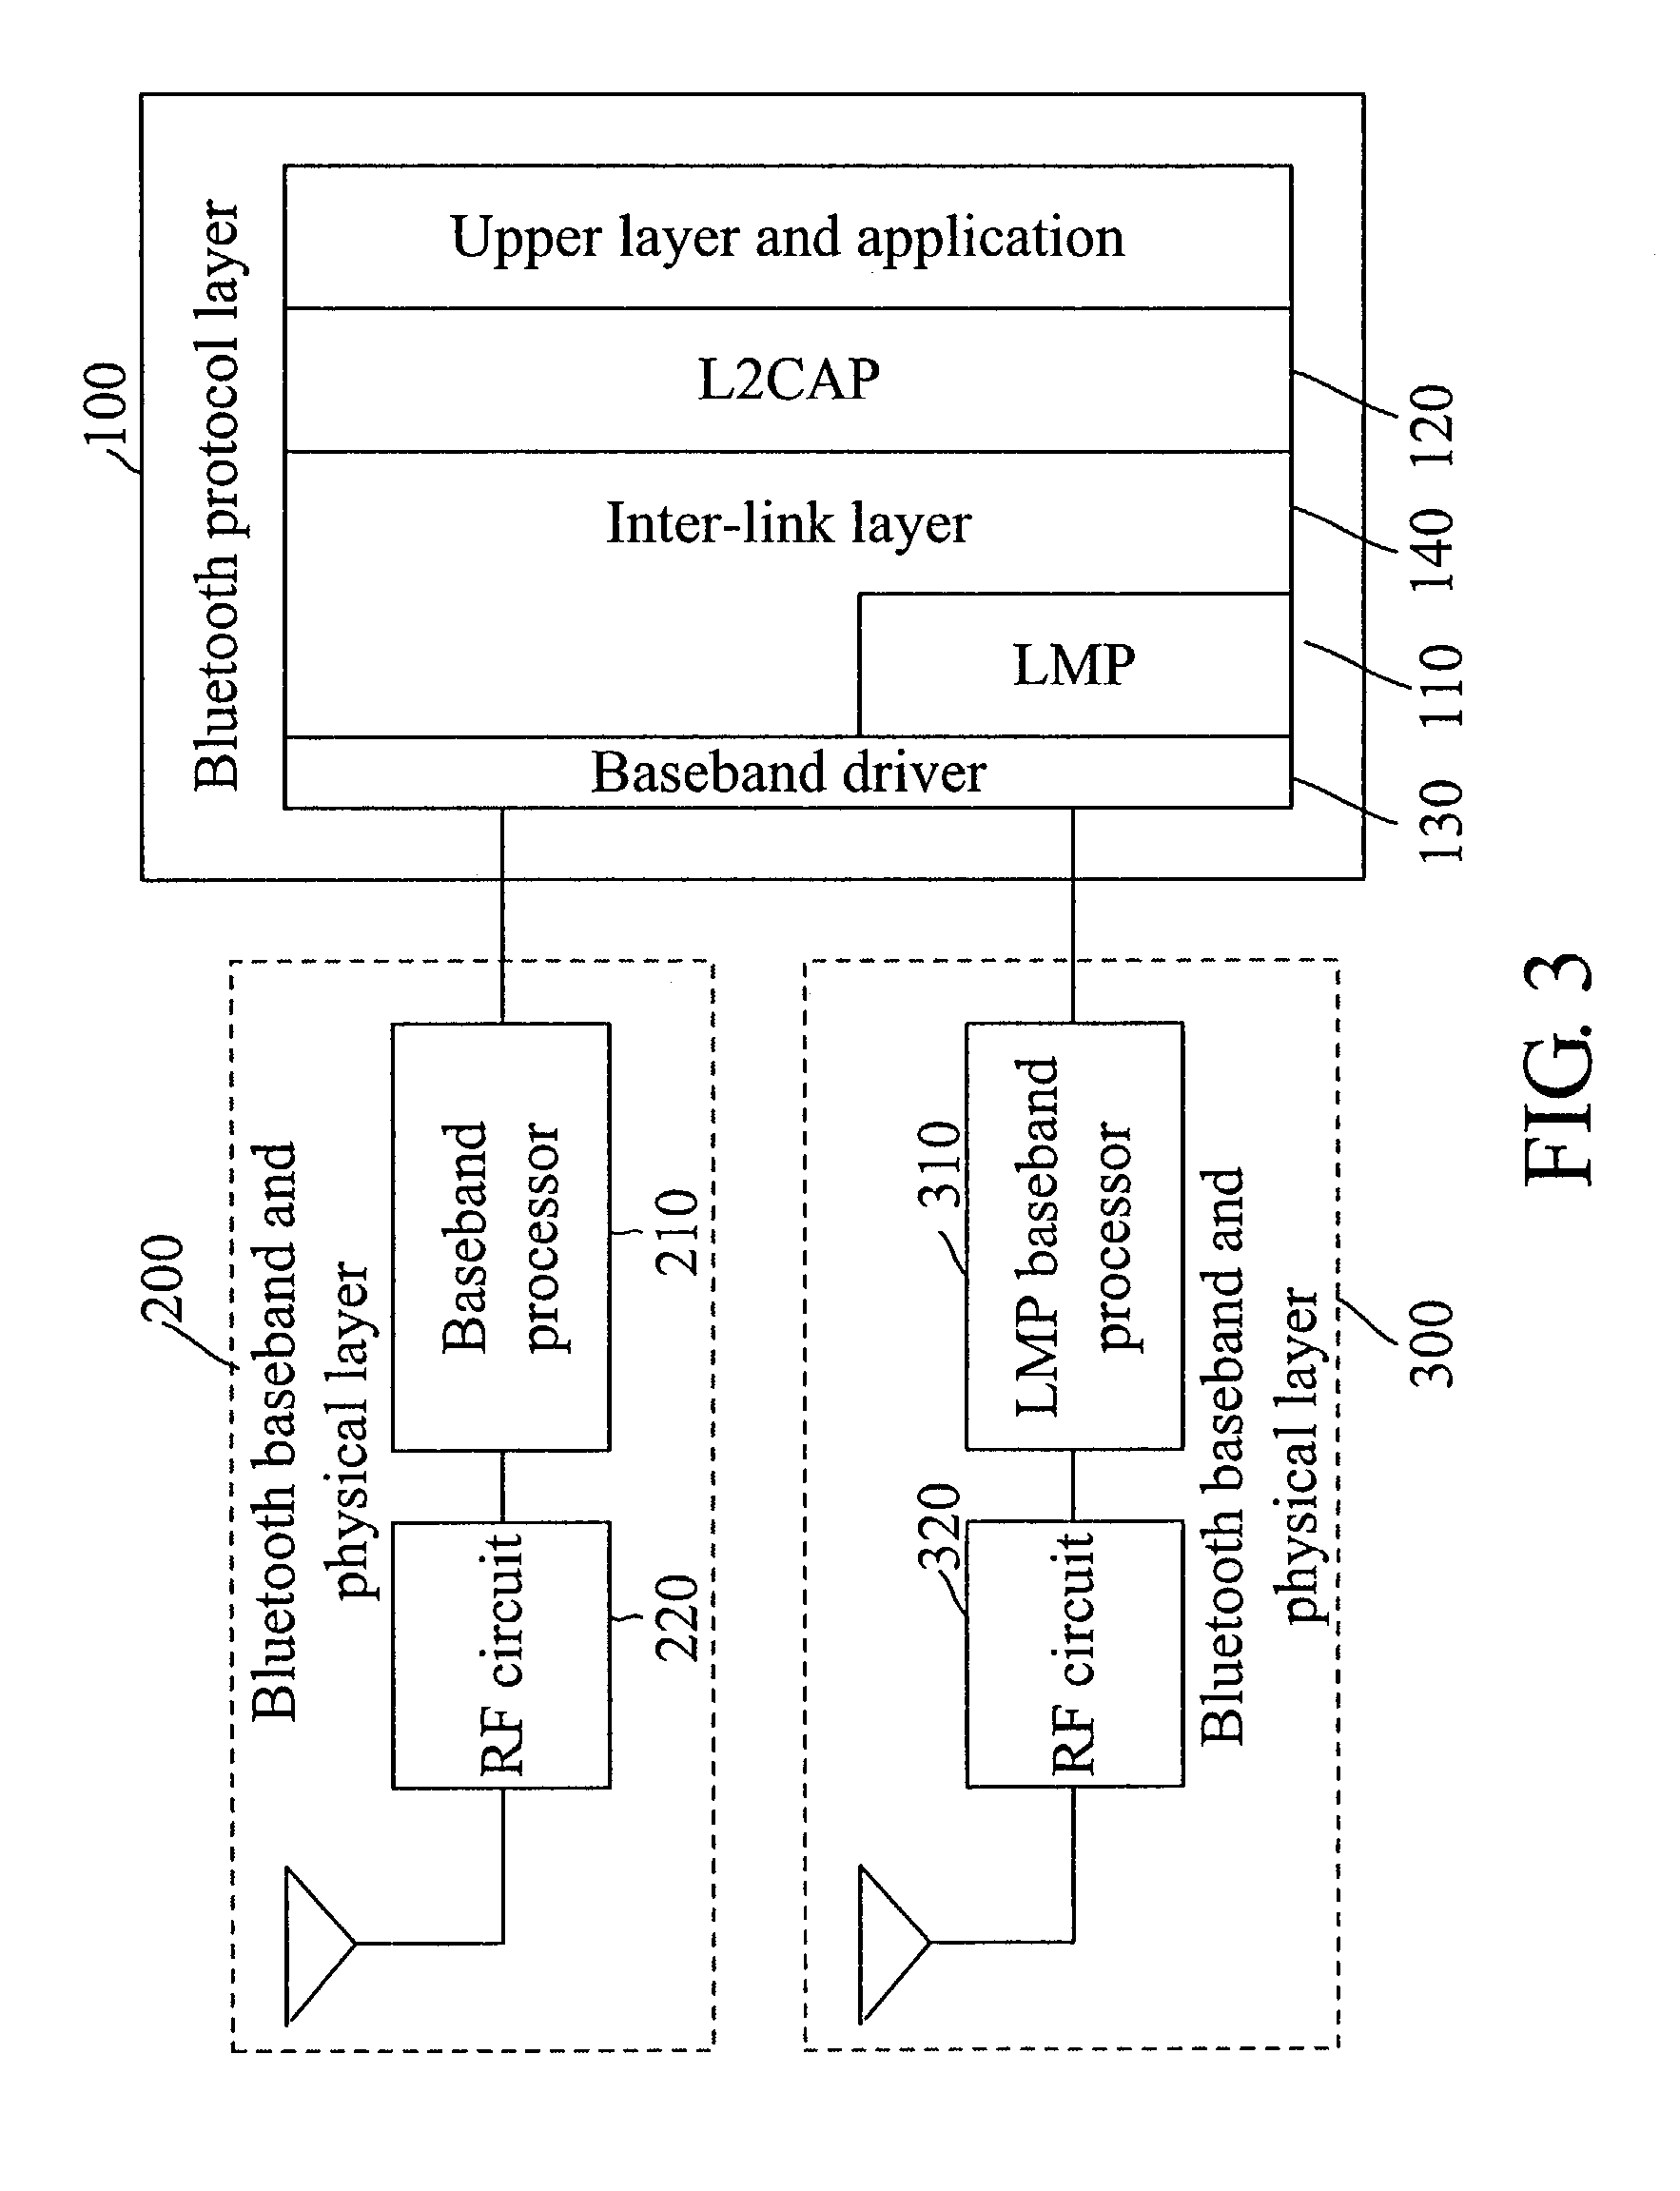 Link path searching and maintaining method for a bluetooth scatternet